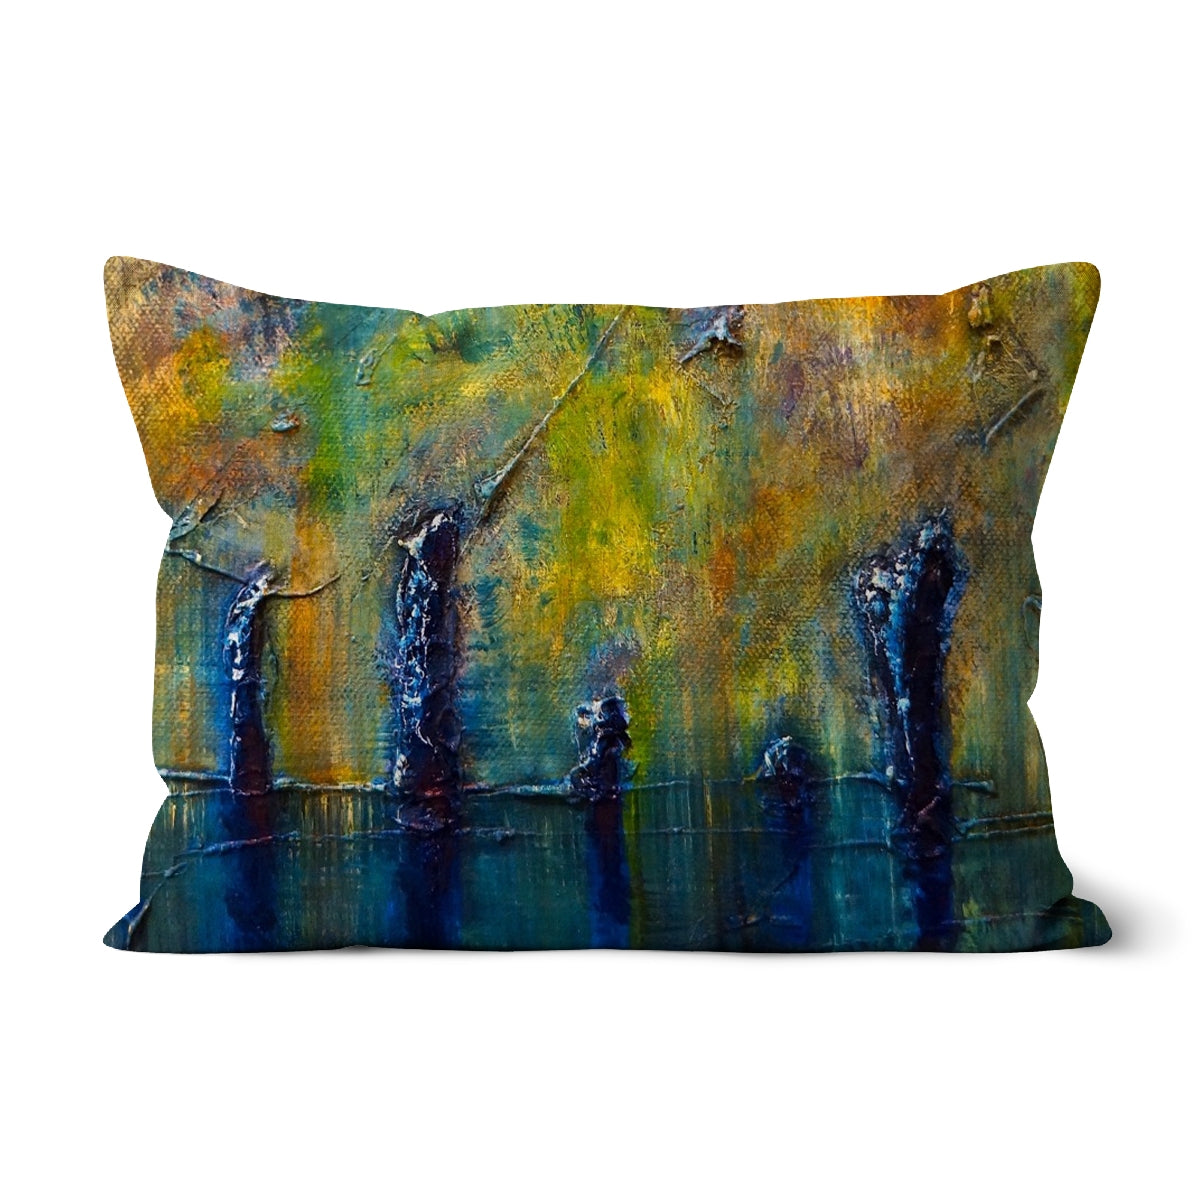 Stenness Moonlight Orkney Art Gifts Cushion-Cushions-Orkney Art Gallery-Canvas-19"x13"-Paintings, Prints, Homeware, Art Gifts From Scotland By Scottish Artist Kevin Hunter